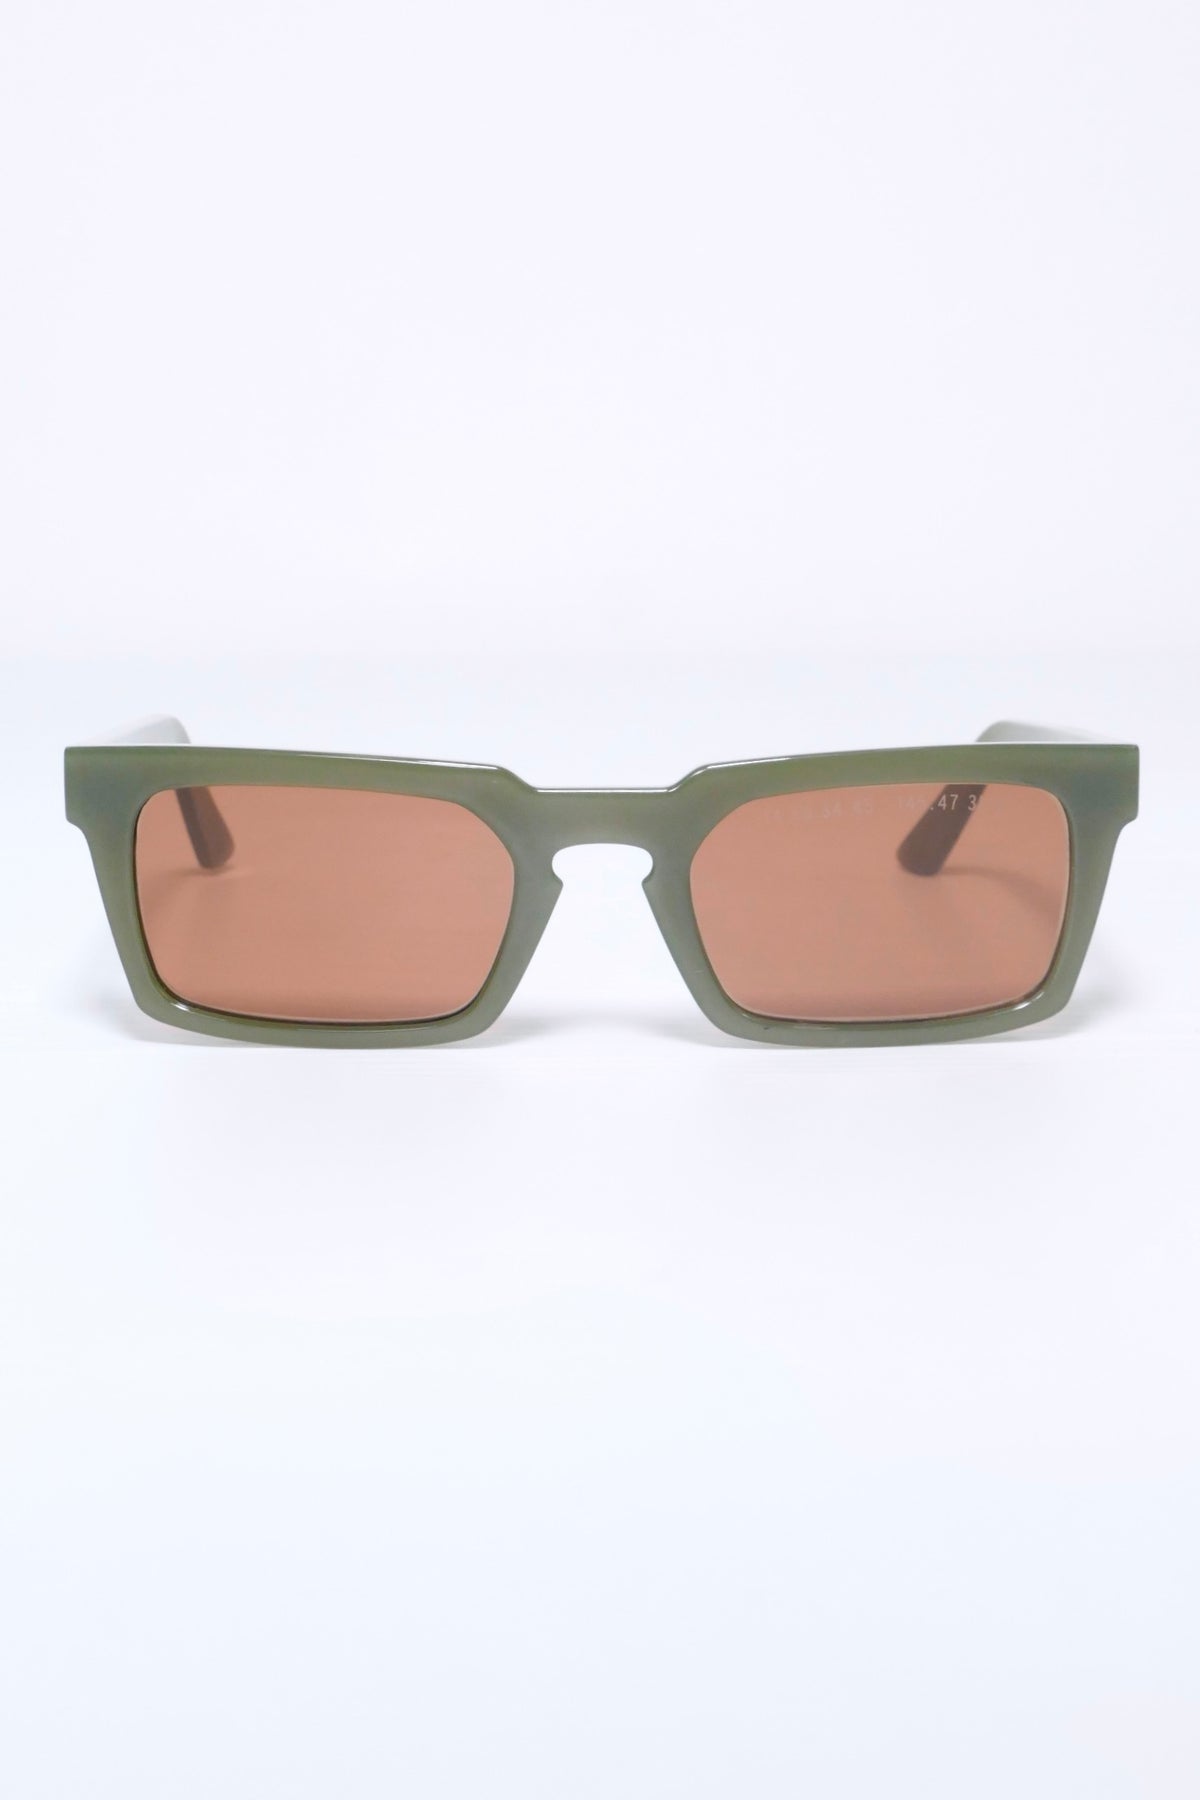 Clean Waves Type 02 Low Sunglasses - Green/Brown